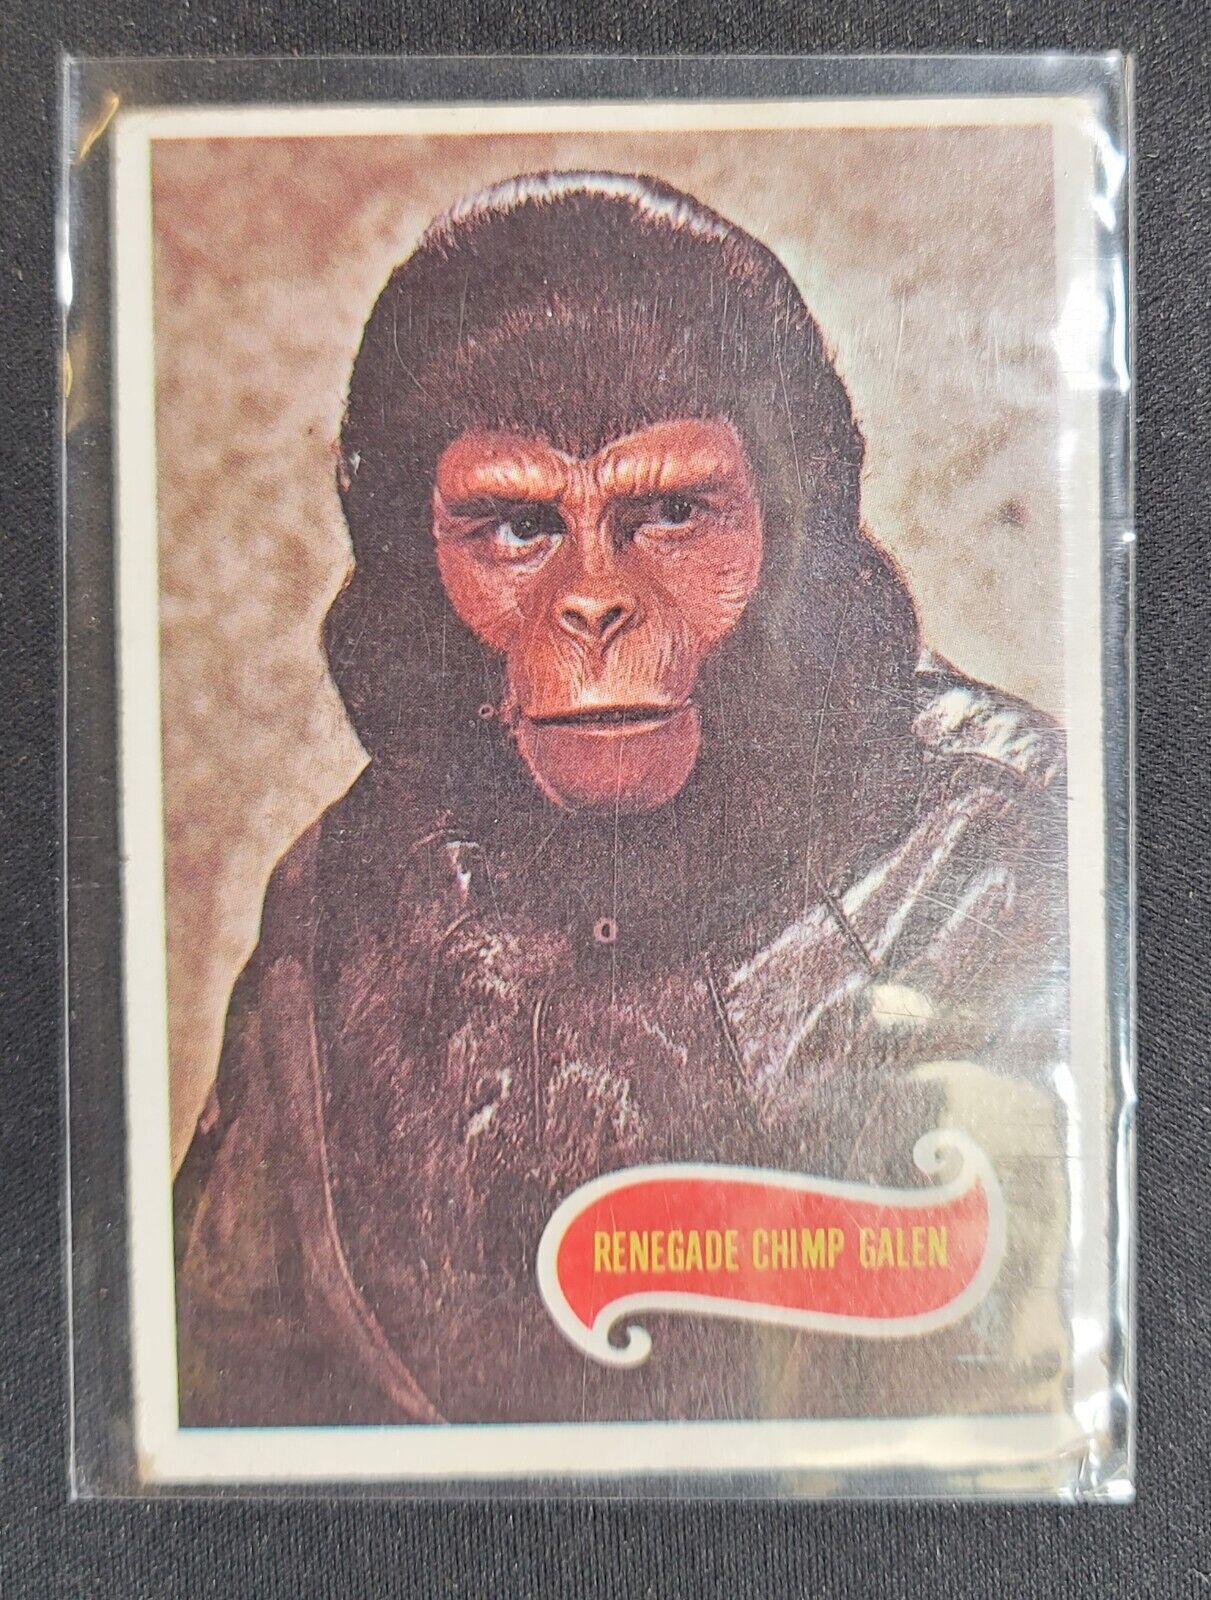 1967 Apjac, Planet of the Apes Television Show, Trading Cards - You Pick